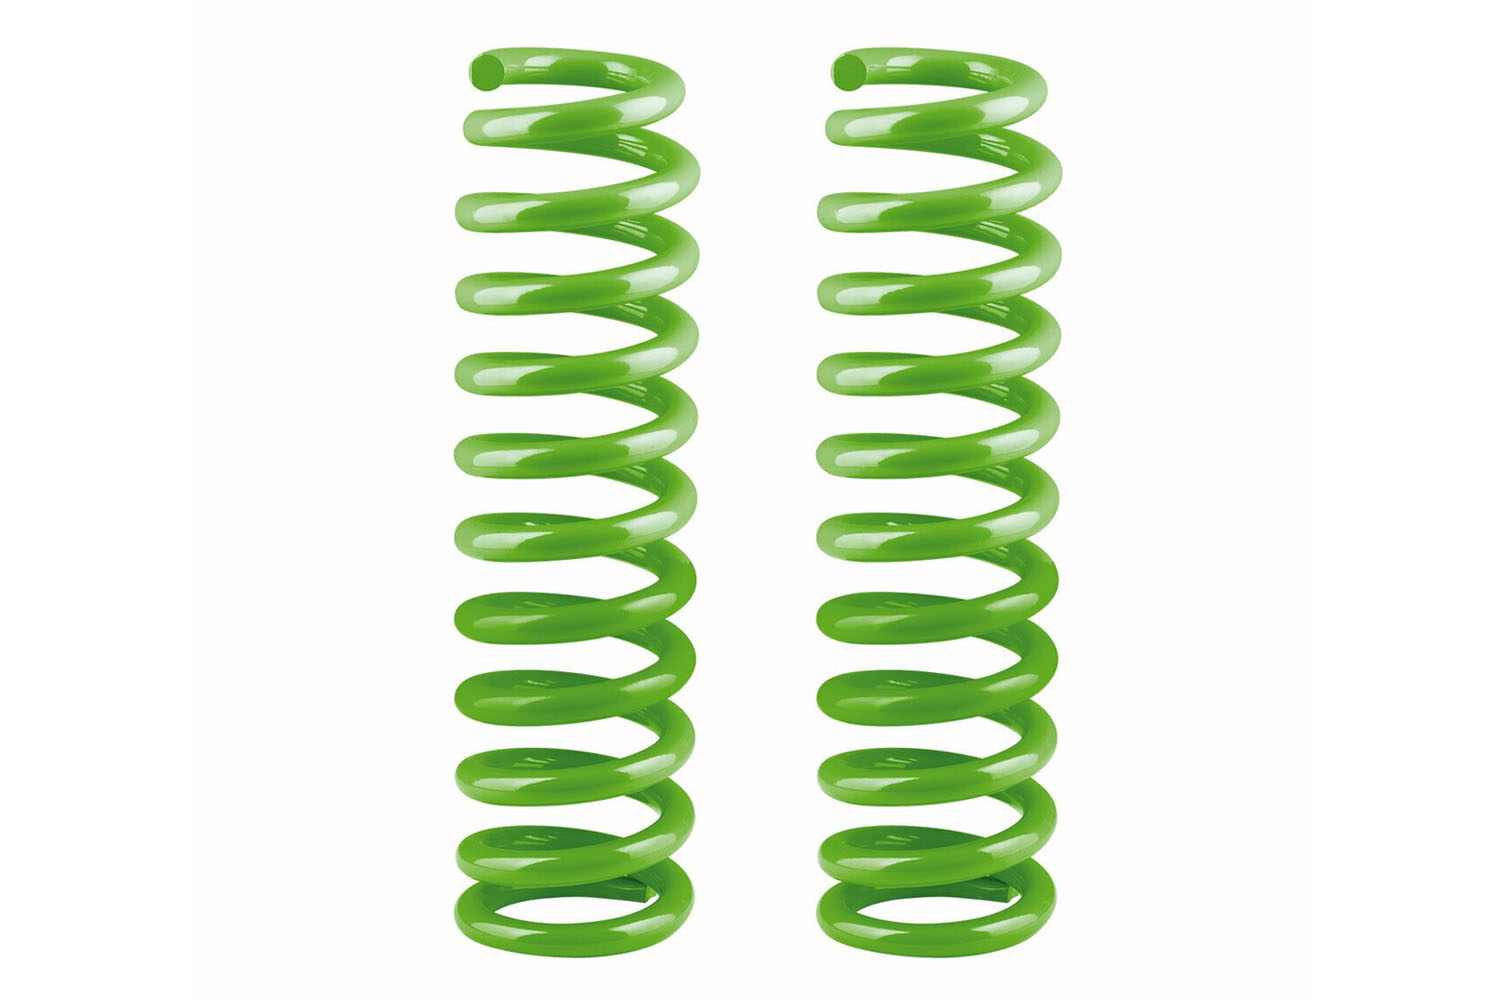 LWB/Grand Vitara 4 Cyl Carb Front Coil Springs - Medium Load (0-110LBS) Suited For 1988-98 Suzuki Si